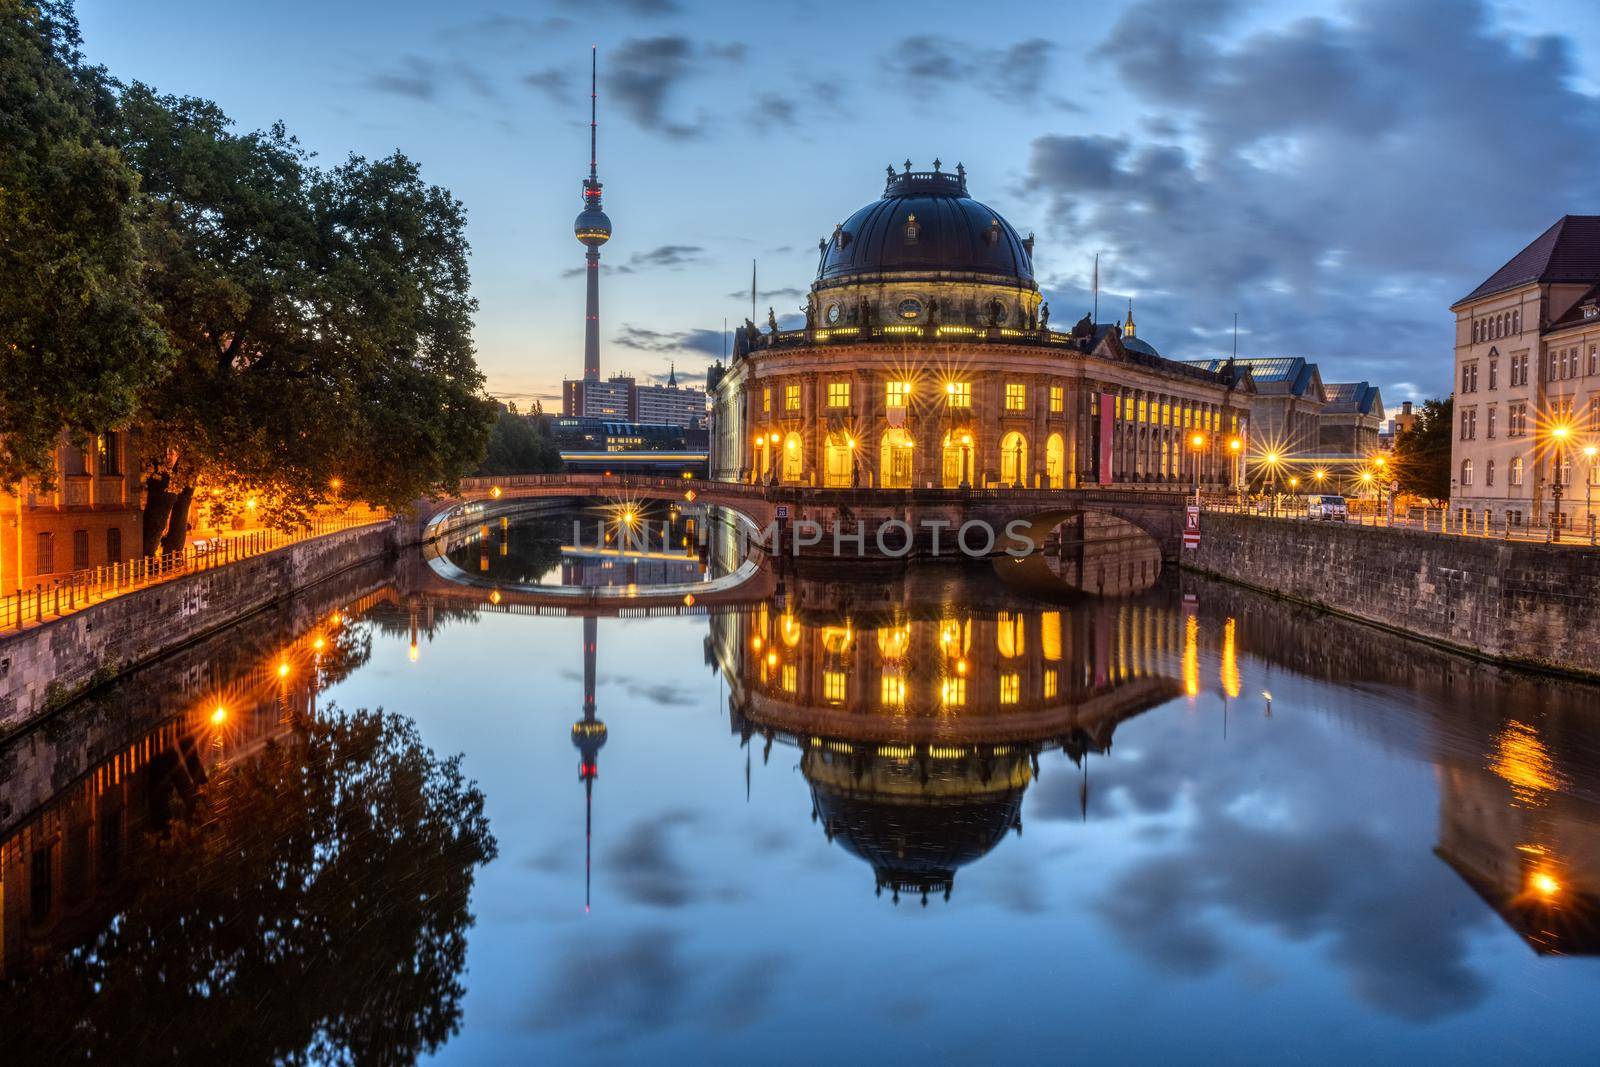 The Bode Museum, the Television Tower and the river Spree by elxeneize